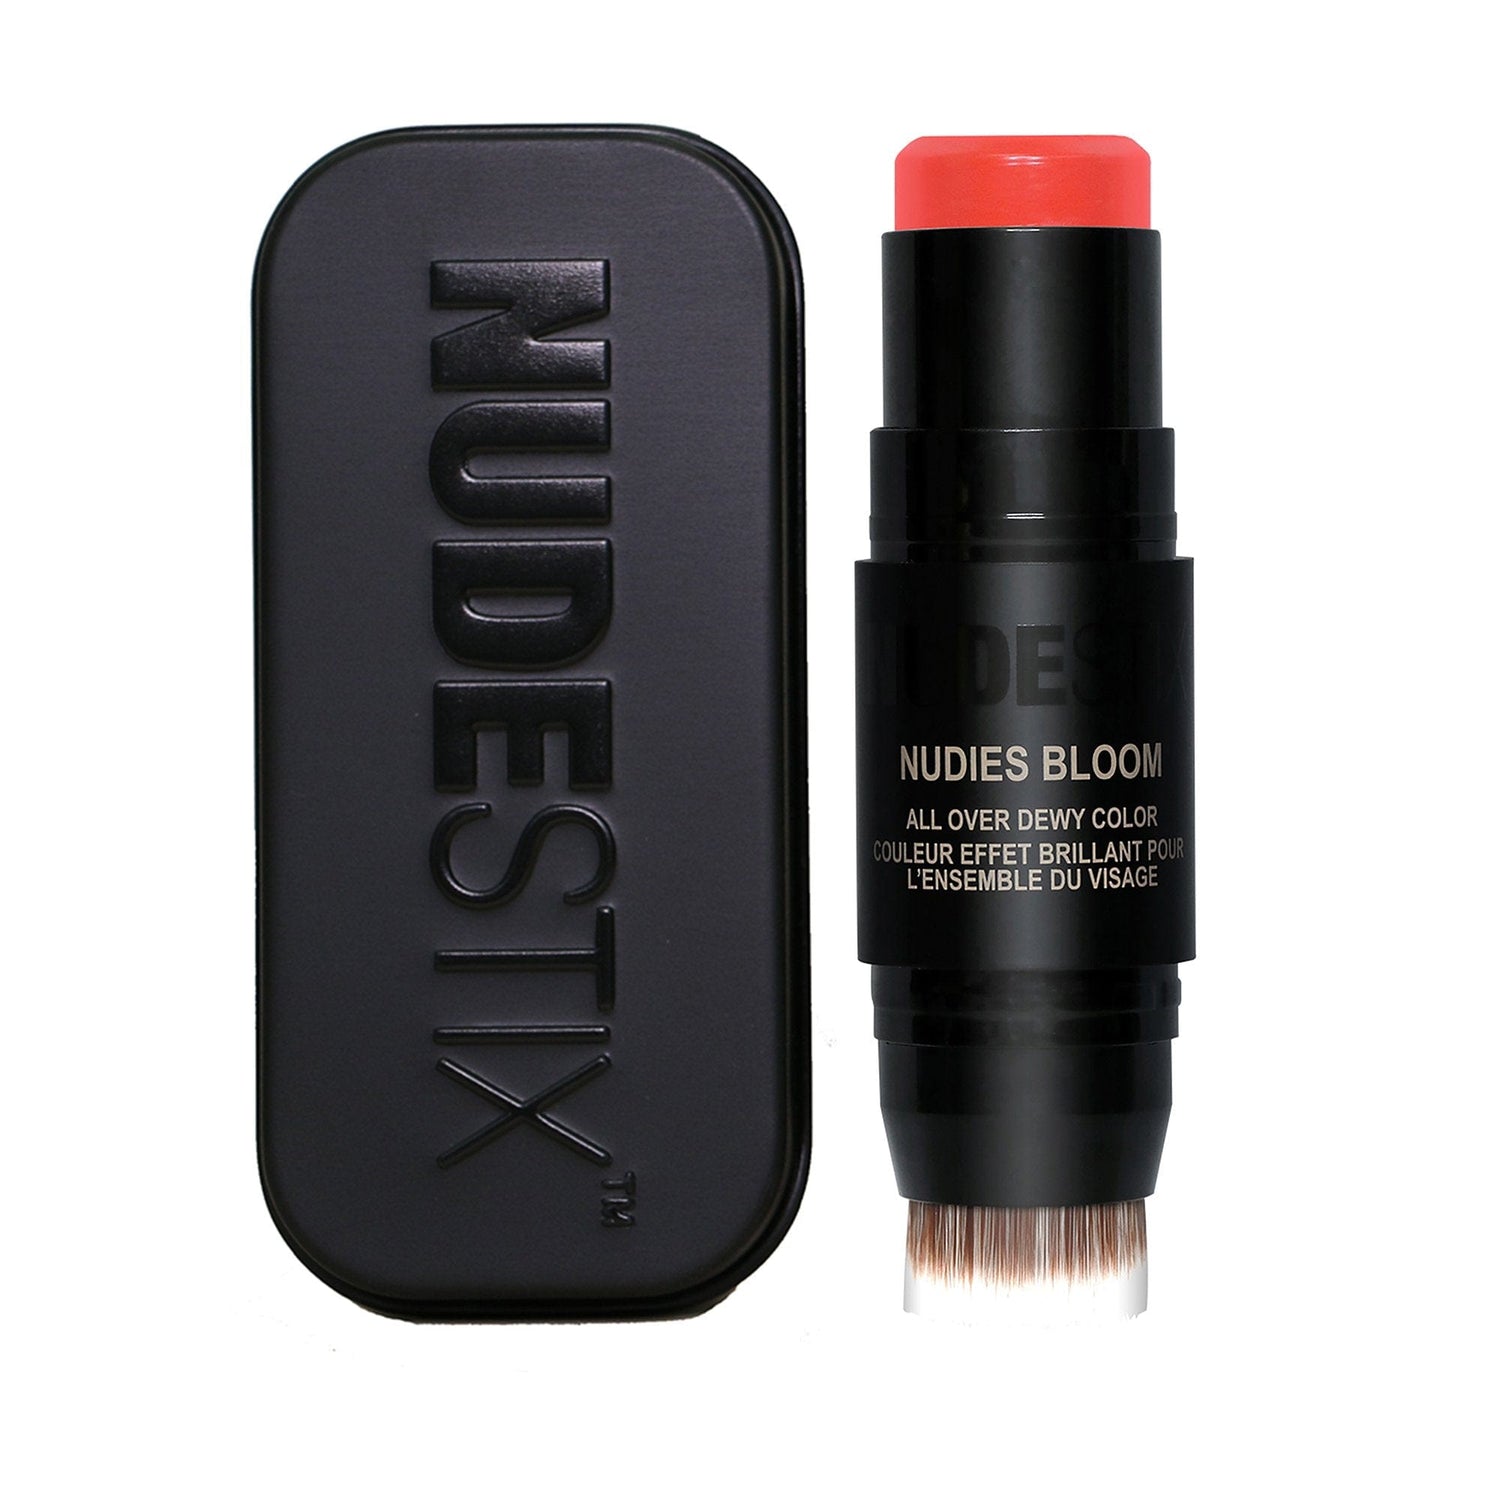 Nudies Bloom in shade Poppy Girl with Nudestix can